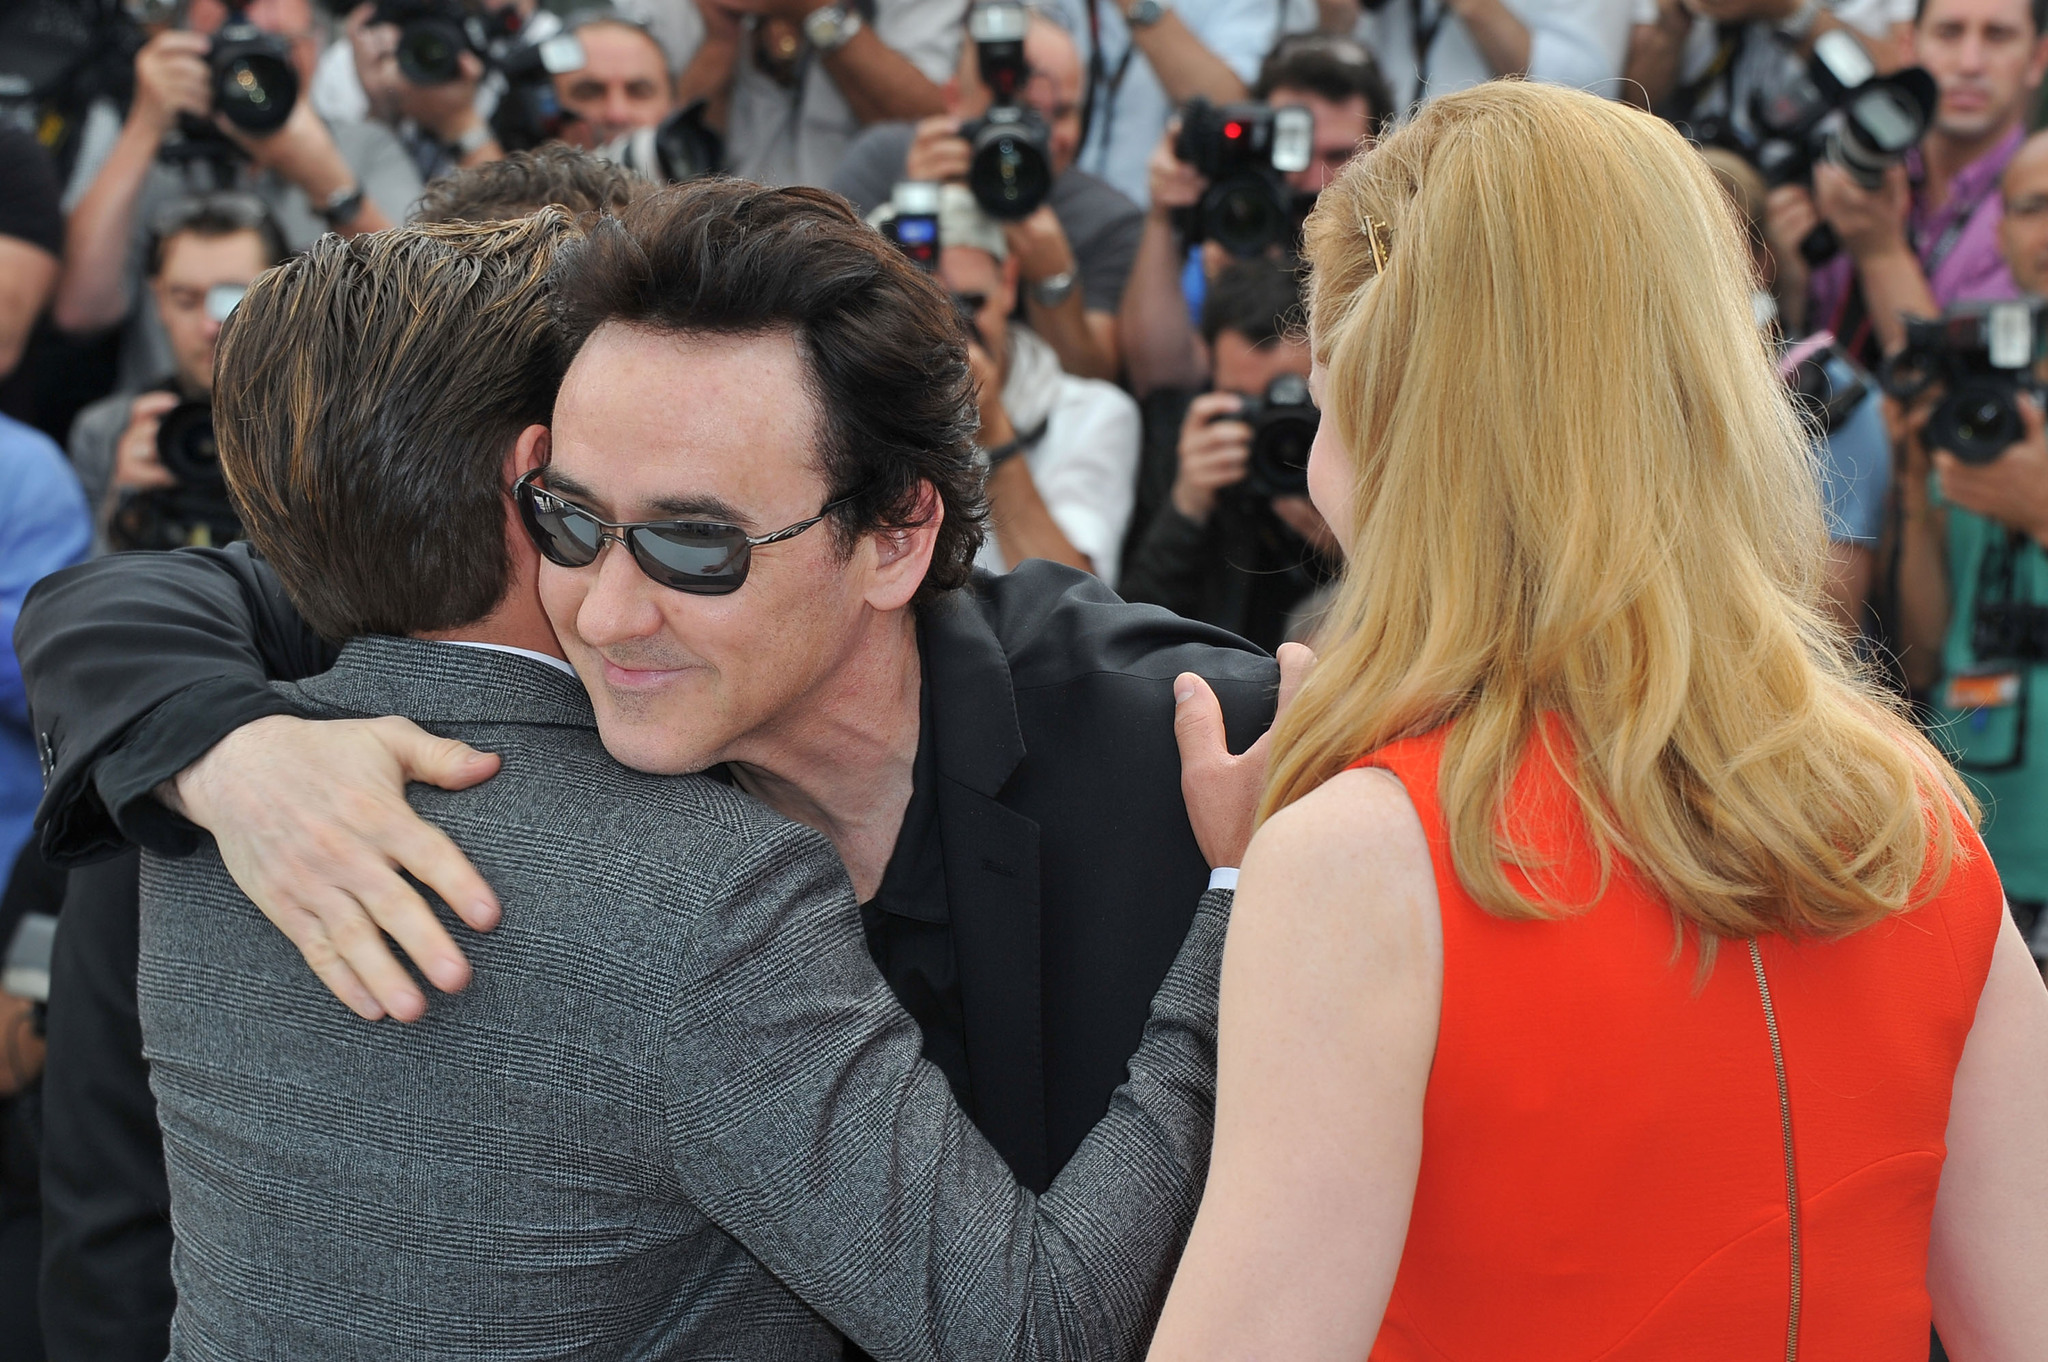 John Cusack, Nicole Kidman and Zac Efron at event of The Paperboy (2012)